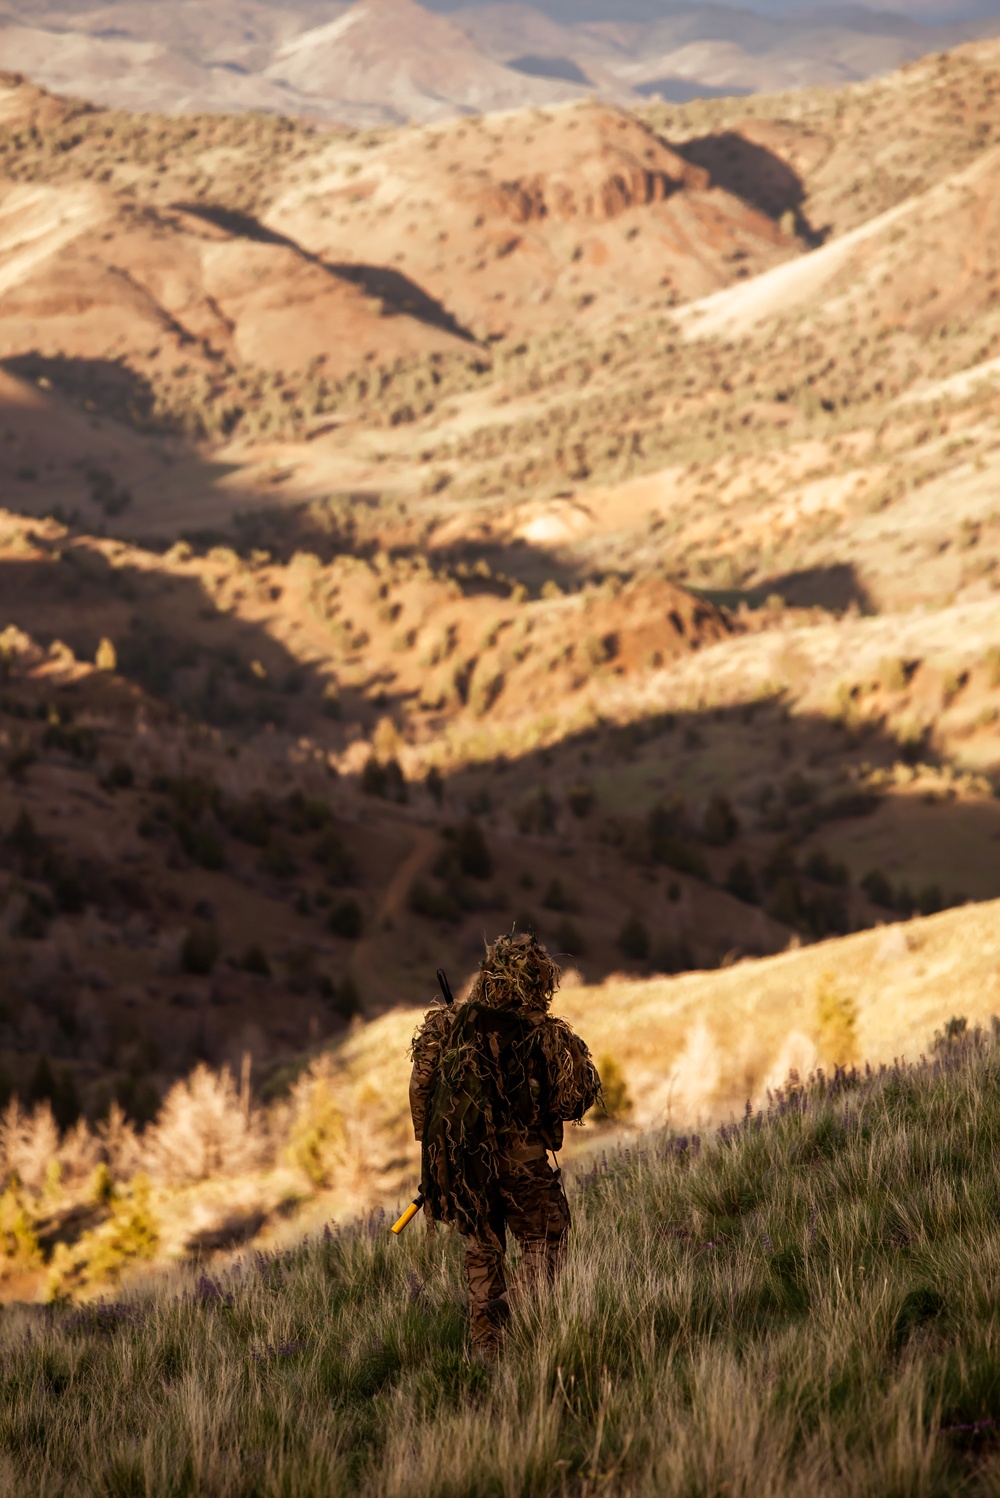 Special Tactics Operators conduct Full Mission Profile in Eastern Oregon